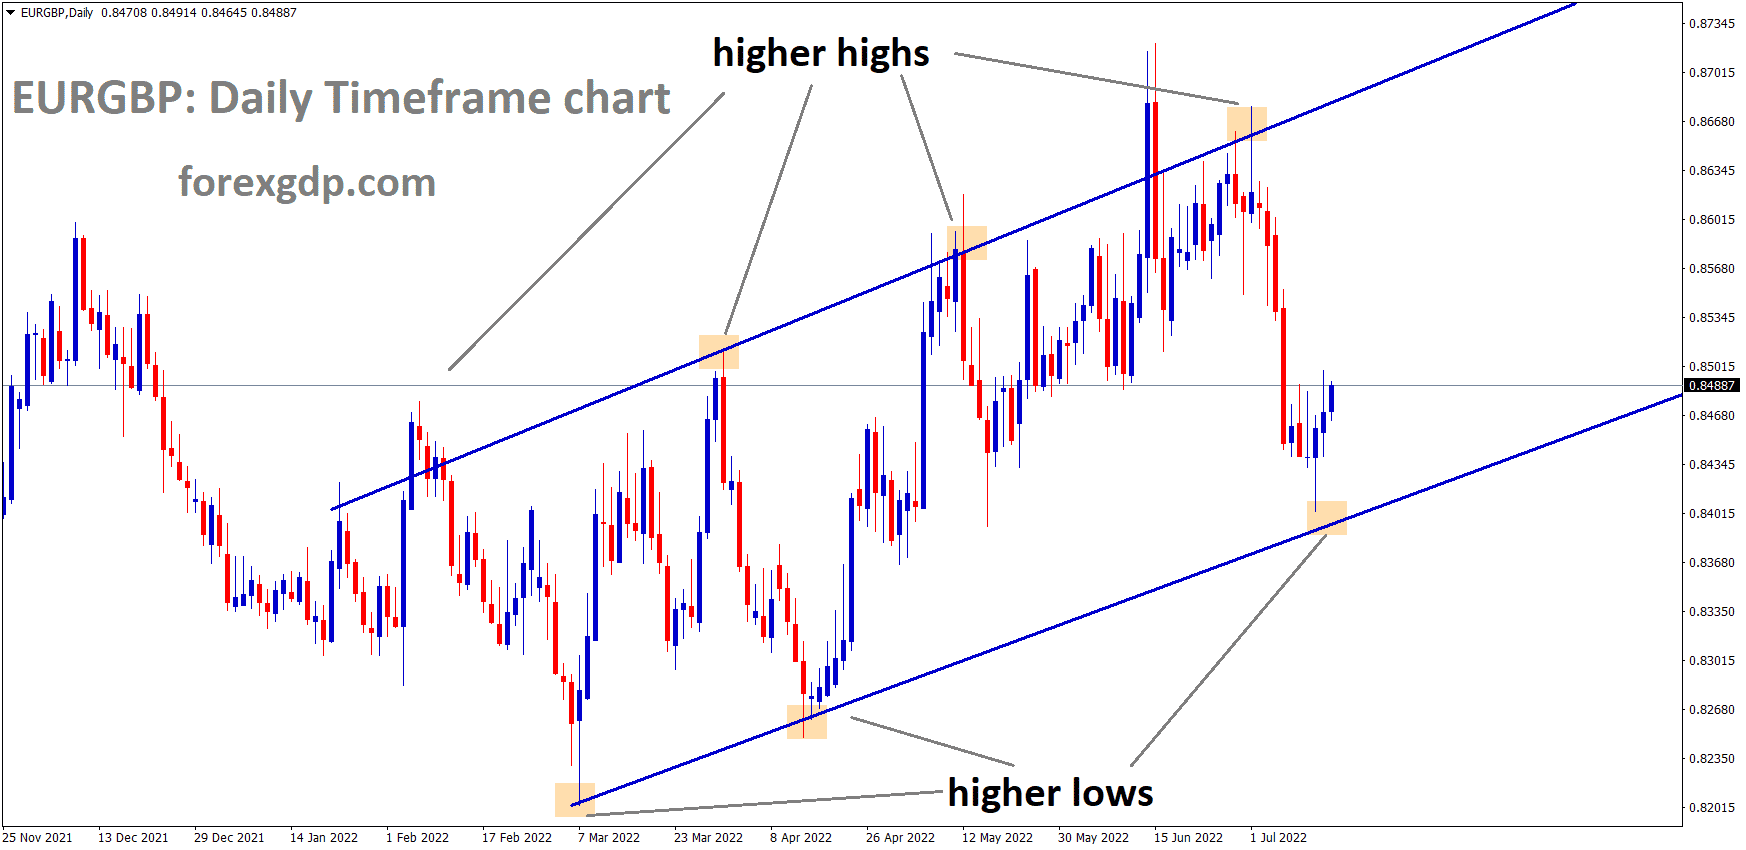 EURGBP is moving in an Ascending channel and the market has rebounded from the Higher low area of the ascending channel